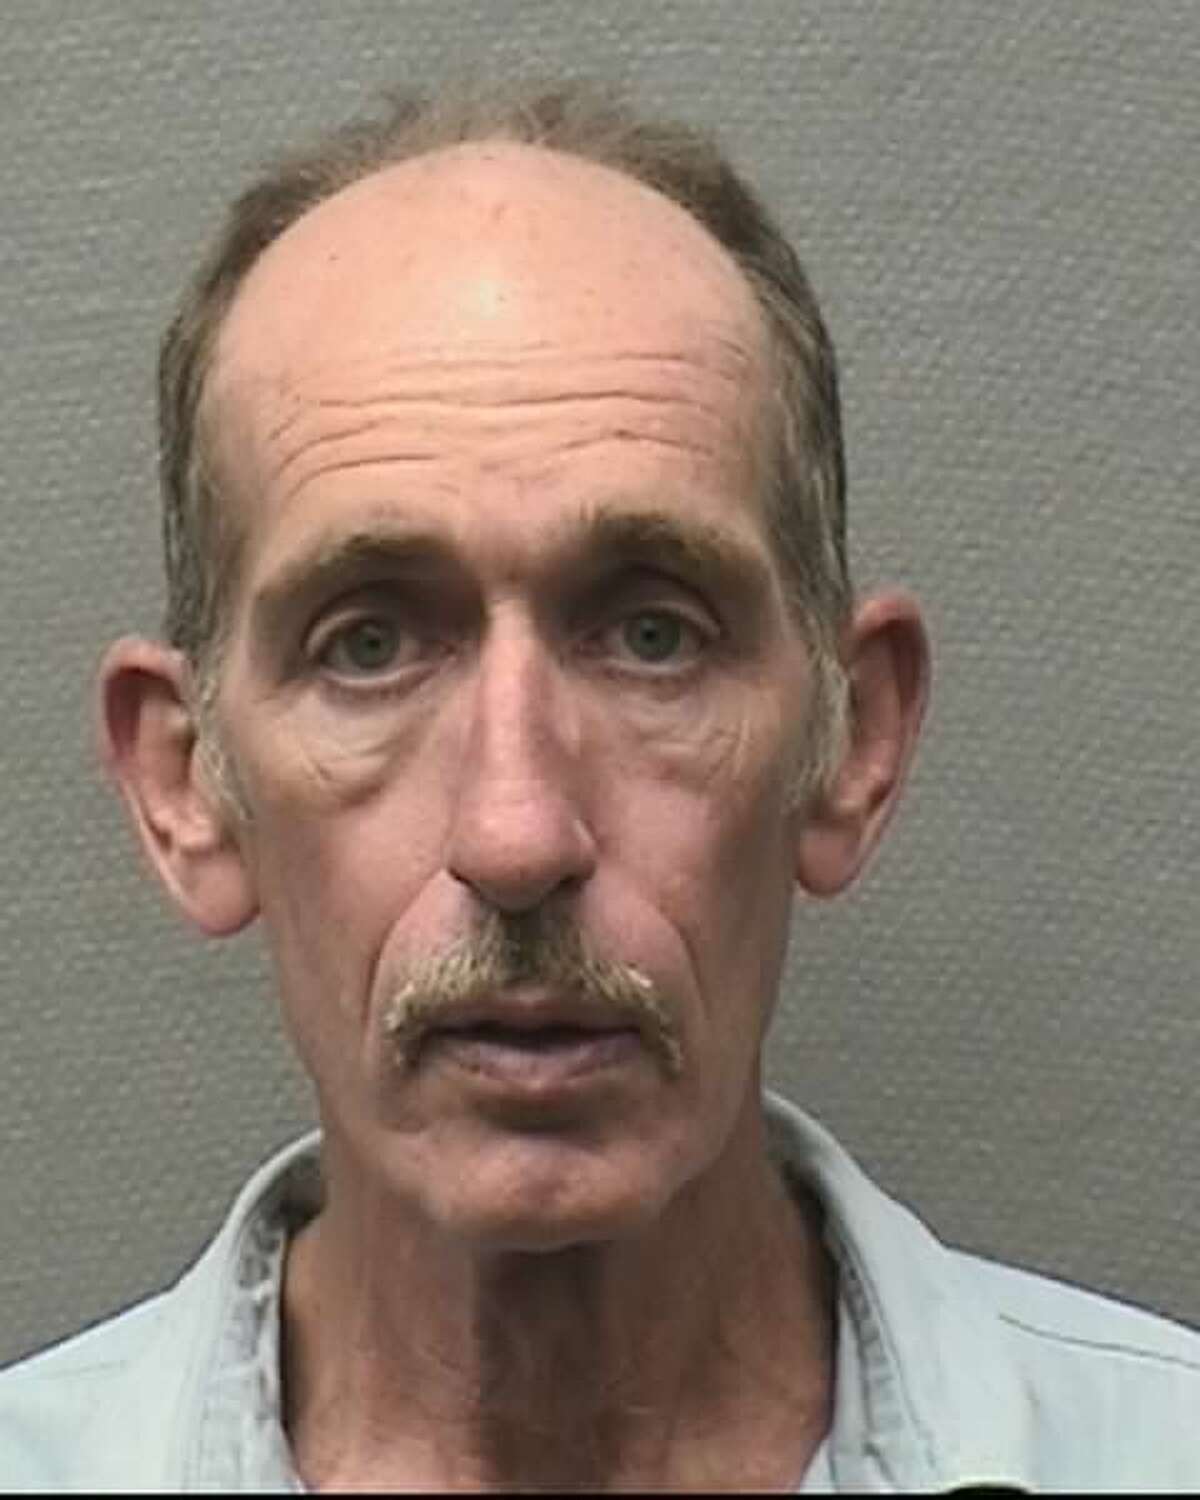 Robert Barton Porter Jr., 58, is charged with aggravated robbery with a deadly weapon.